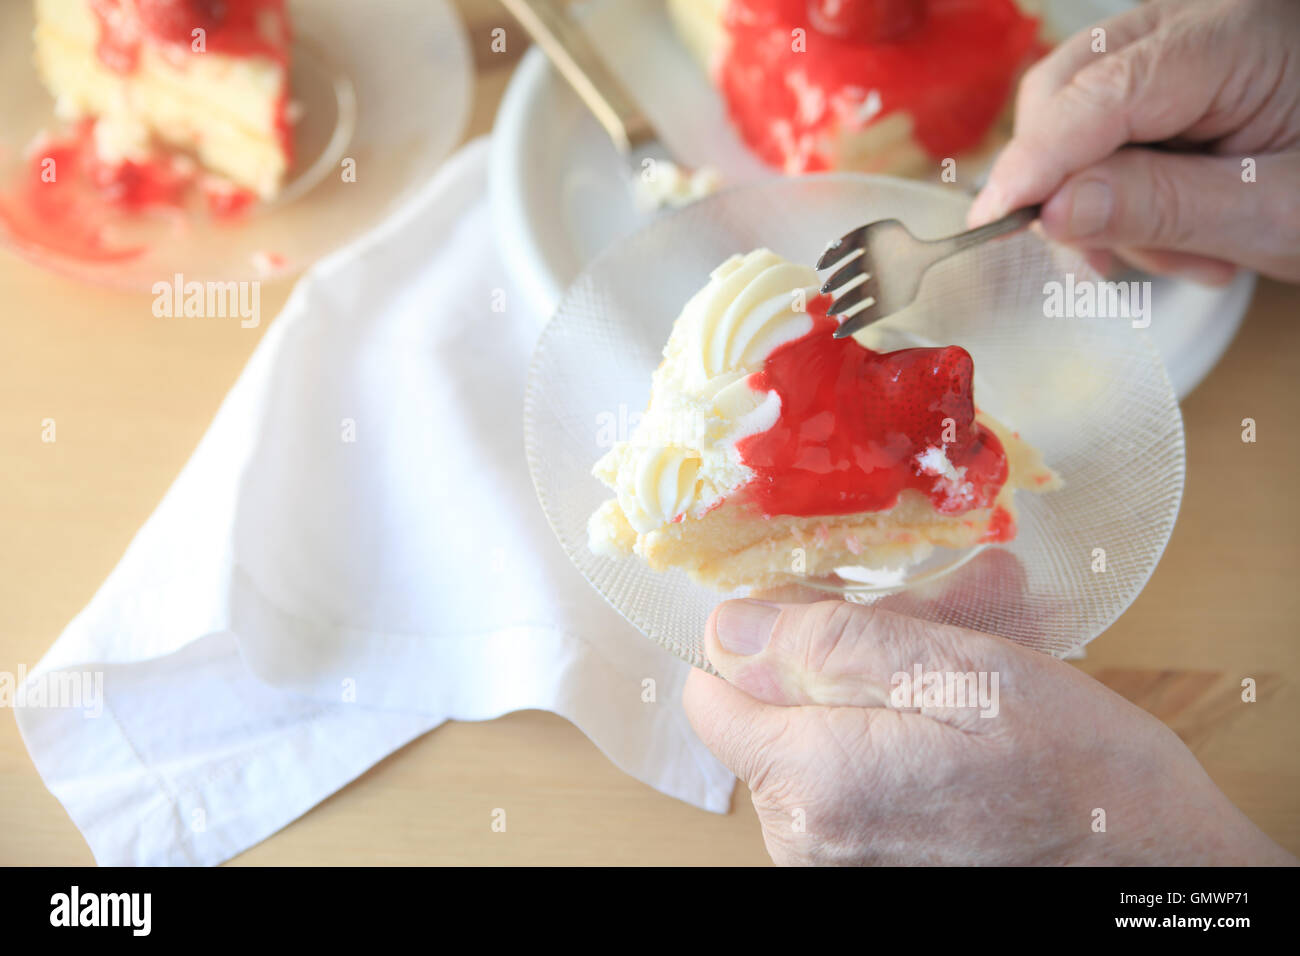 Man holds glass dish with portion of cake with whipped cream and strawberry glaze. Stock Photo